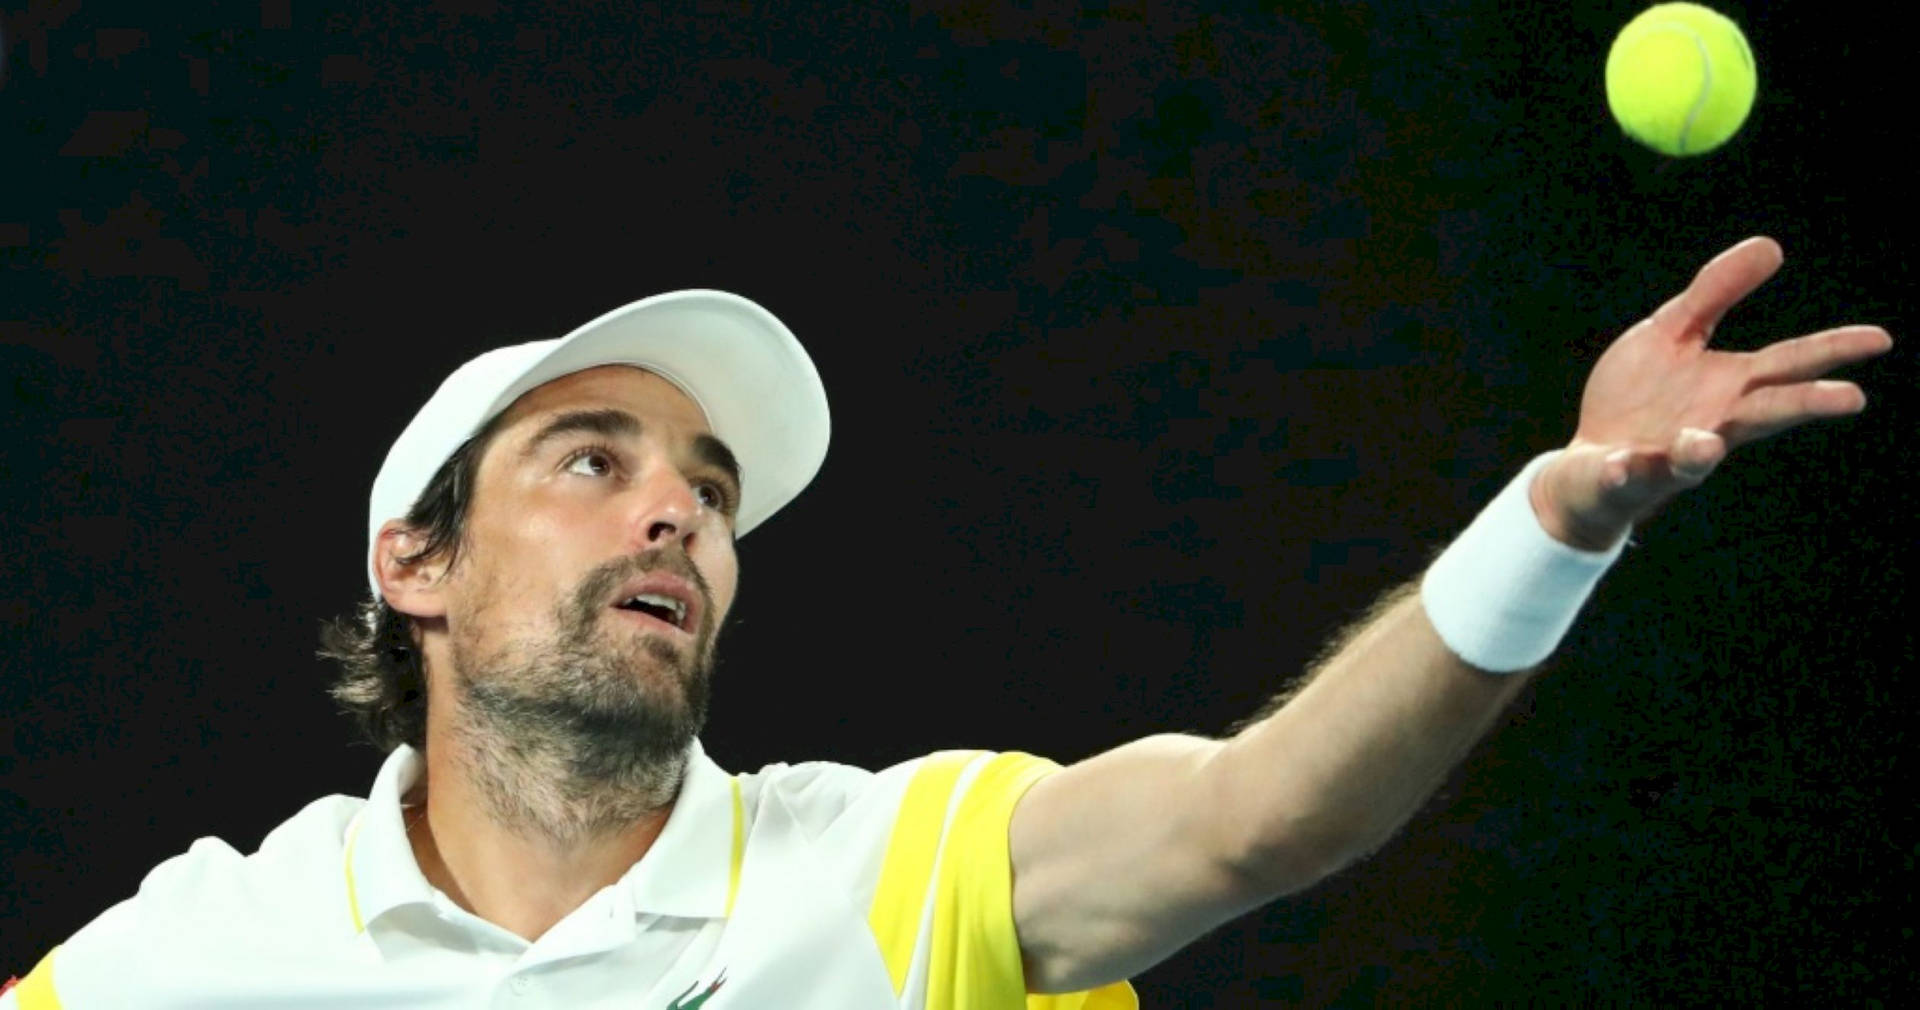 "French Tennis Player Jeremy Chardy in the Midst of a Serve" Wallpaper